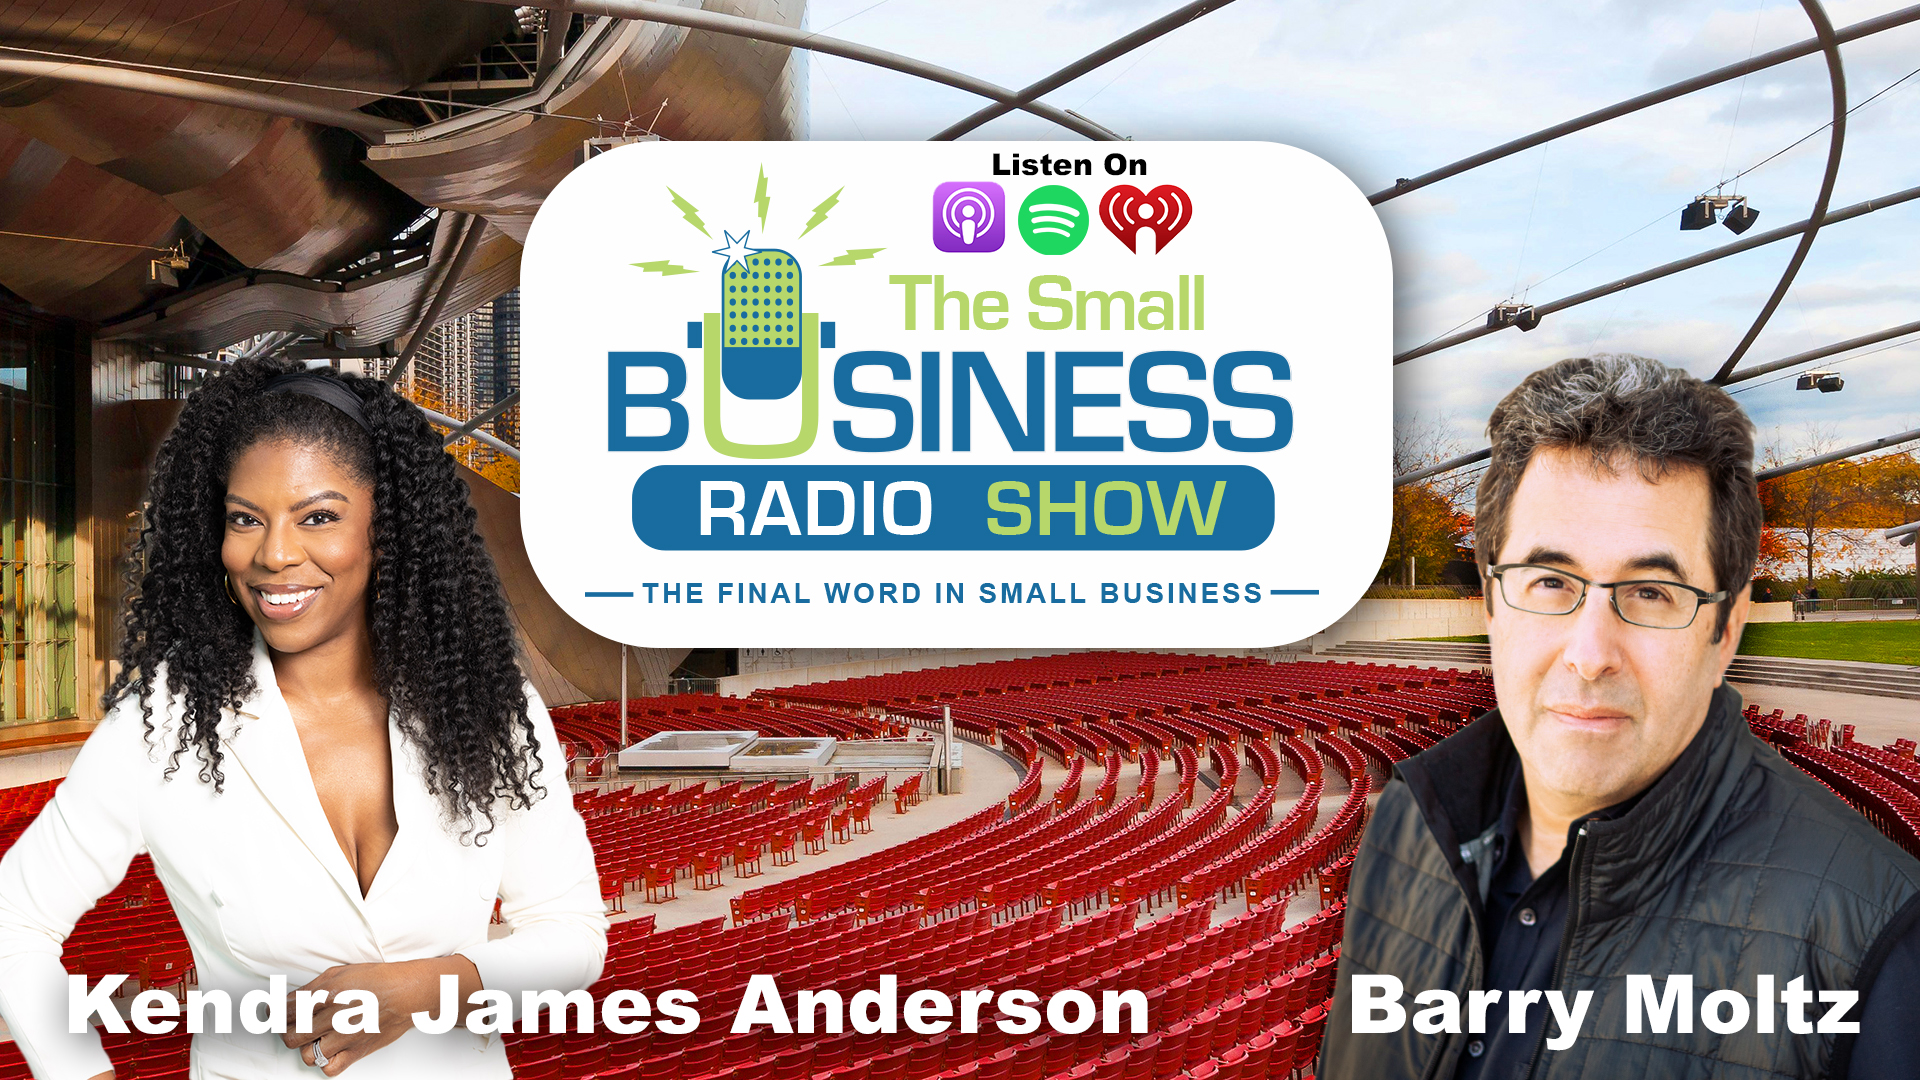 Kendra James Anderson on The Small Business Radio Show